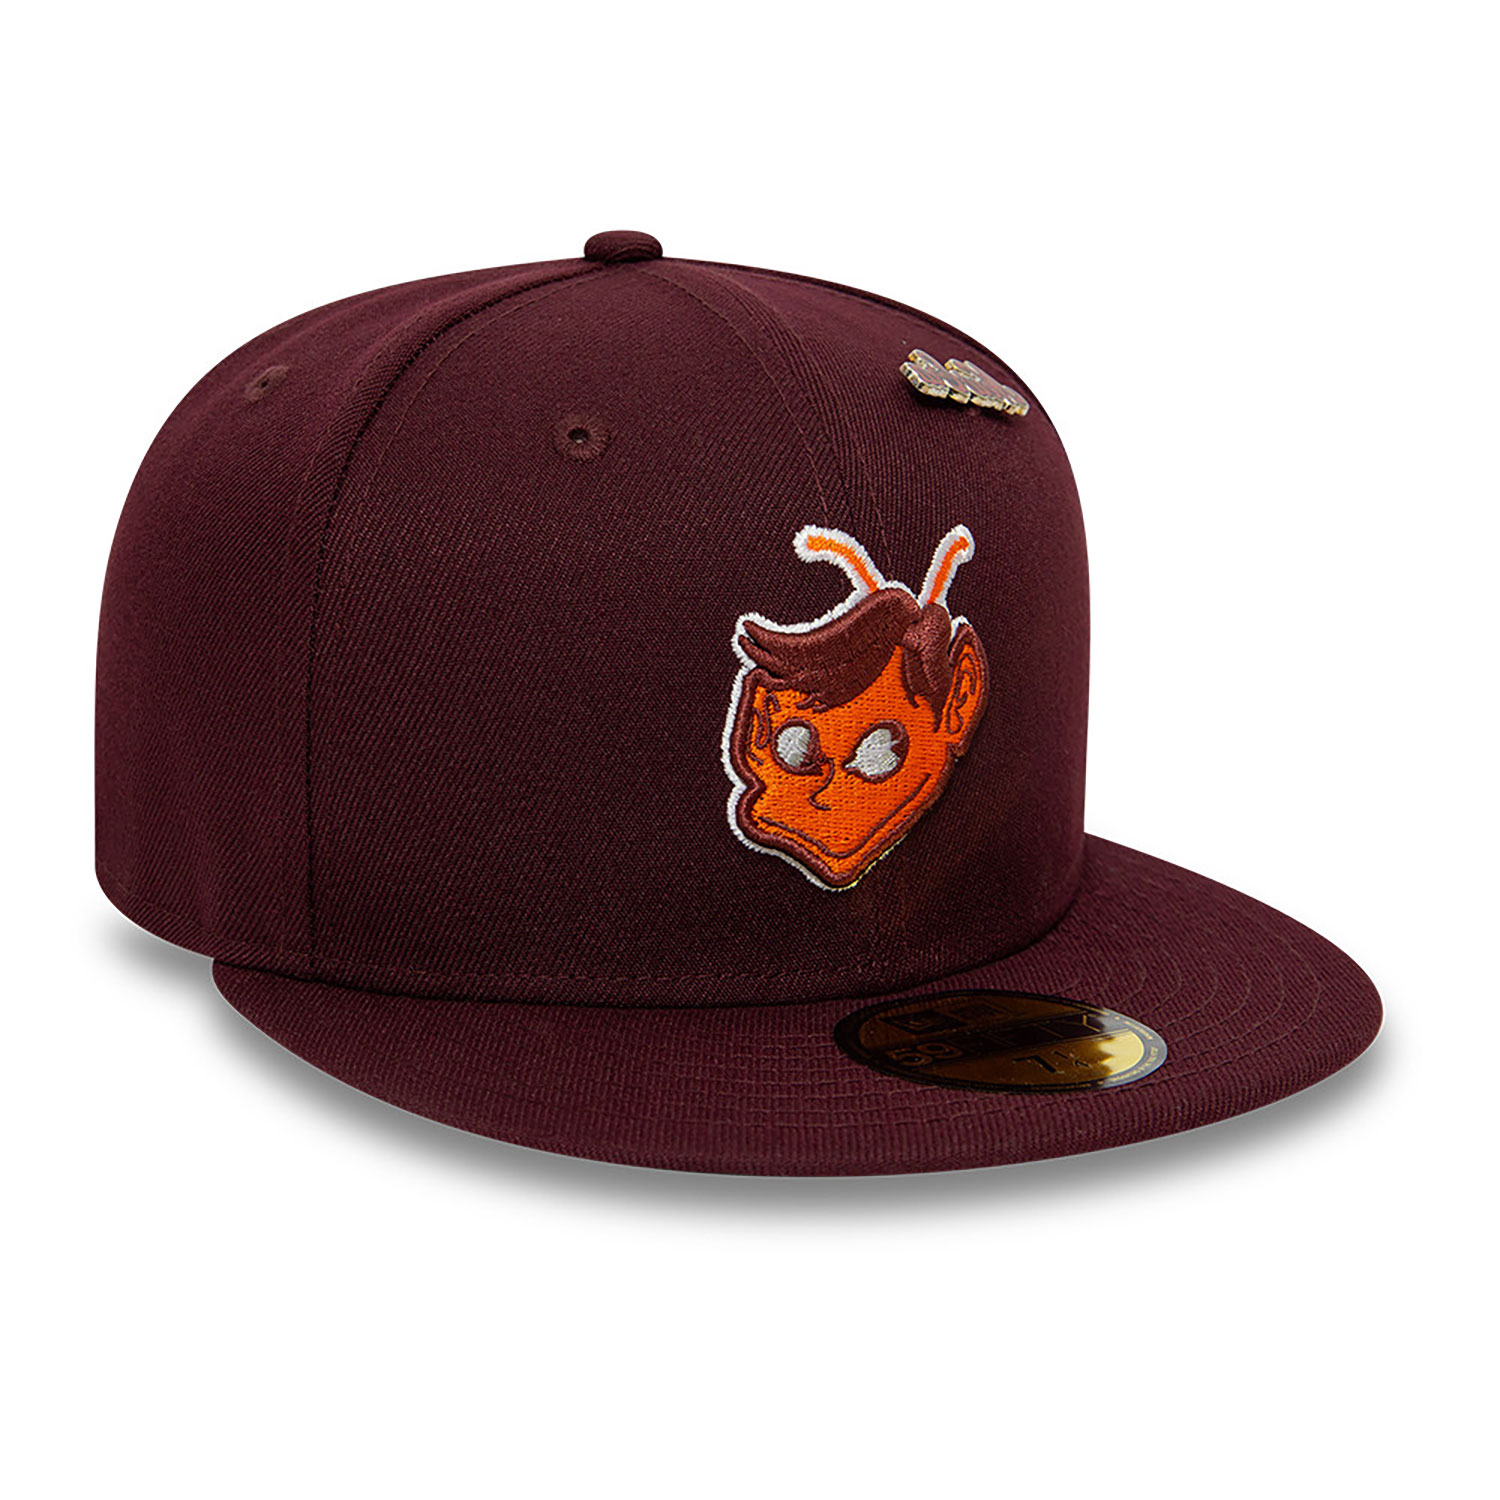 St. Louis Browns MLB Cooperstown Maroon 59FIFTY Fitted Cap